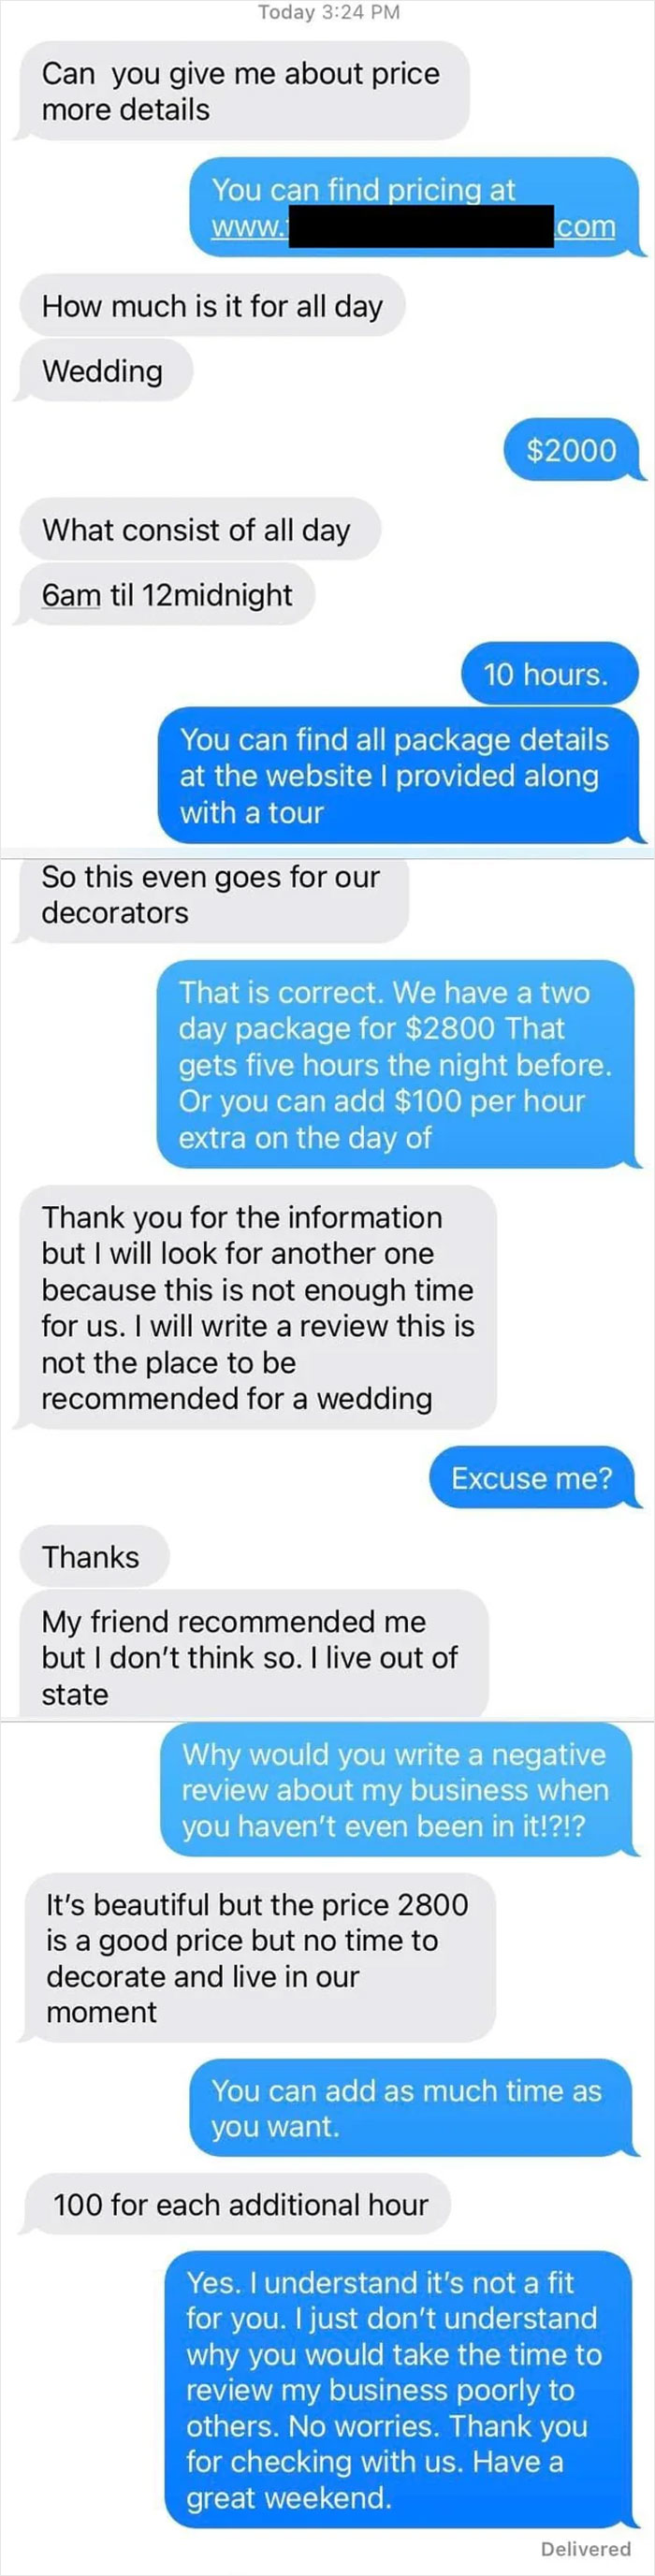 Friend’s Wedding Venue Is “Beautiful” And A “Good Price”